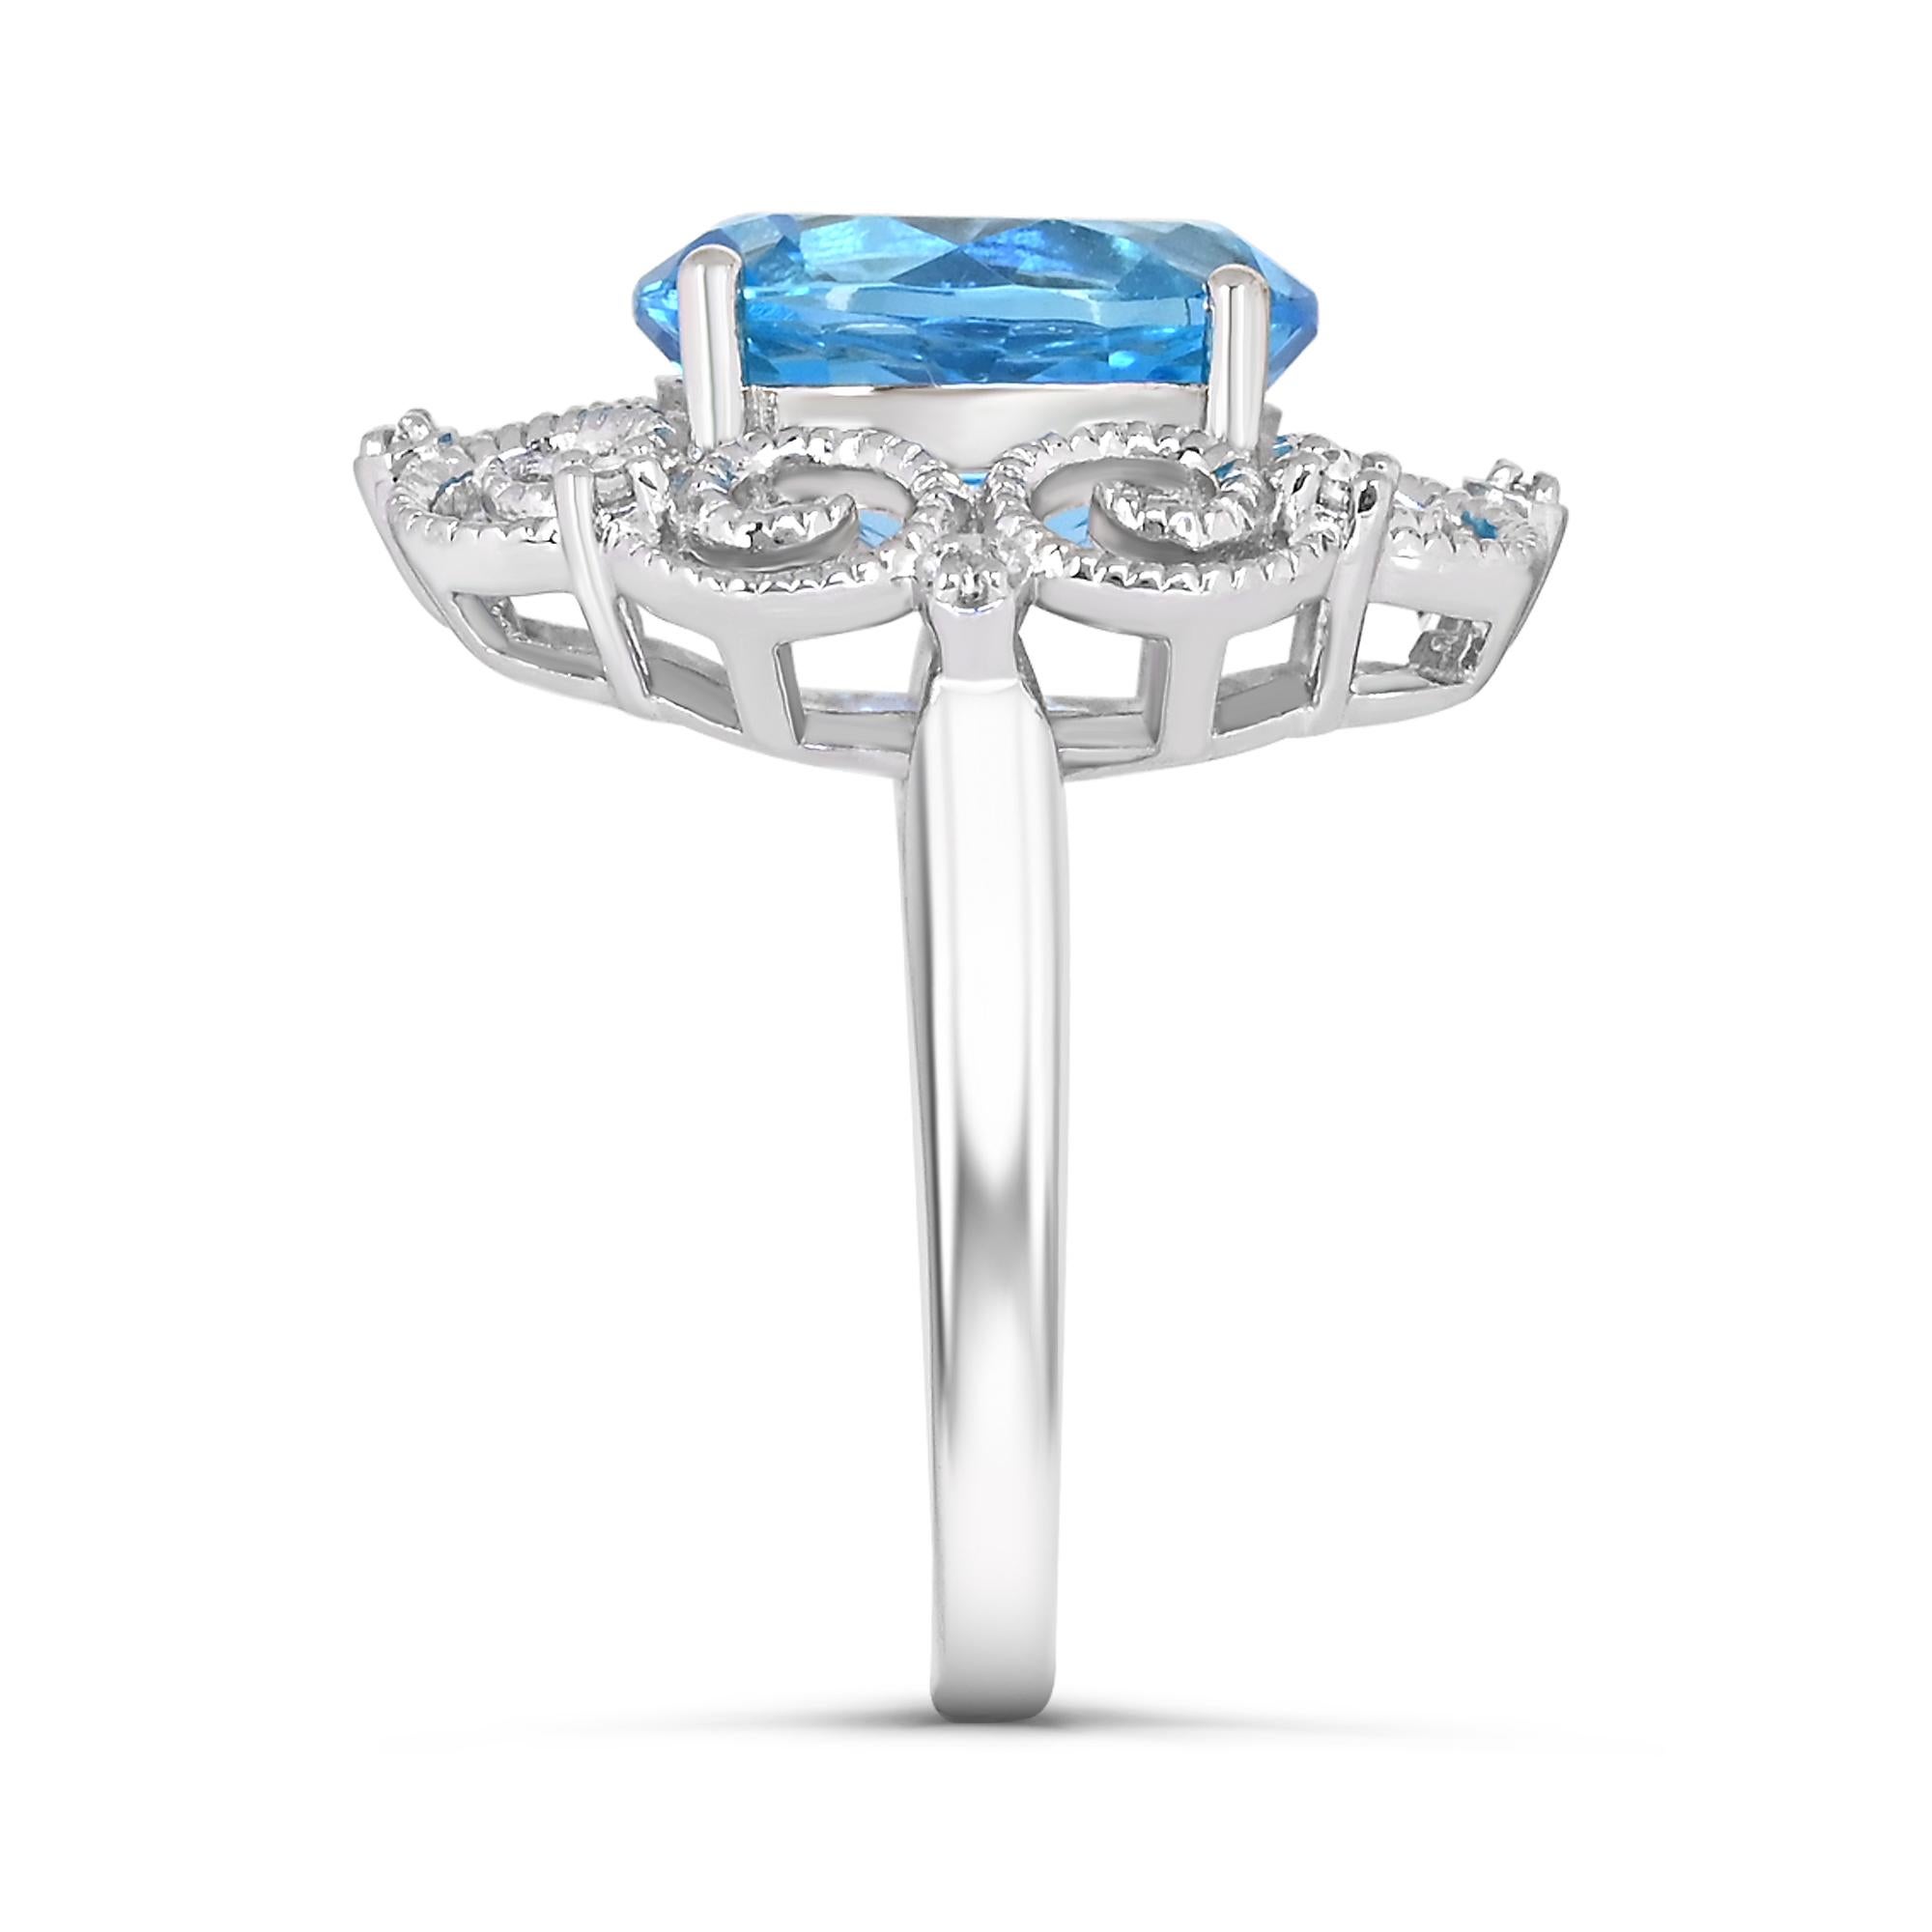 Oval Cut 5-1/2 ct. Swiss Blue Topaz and Diamond Accent Retro Border Sterling Silver Ring For Sale